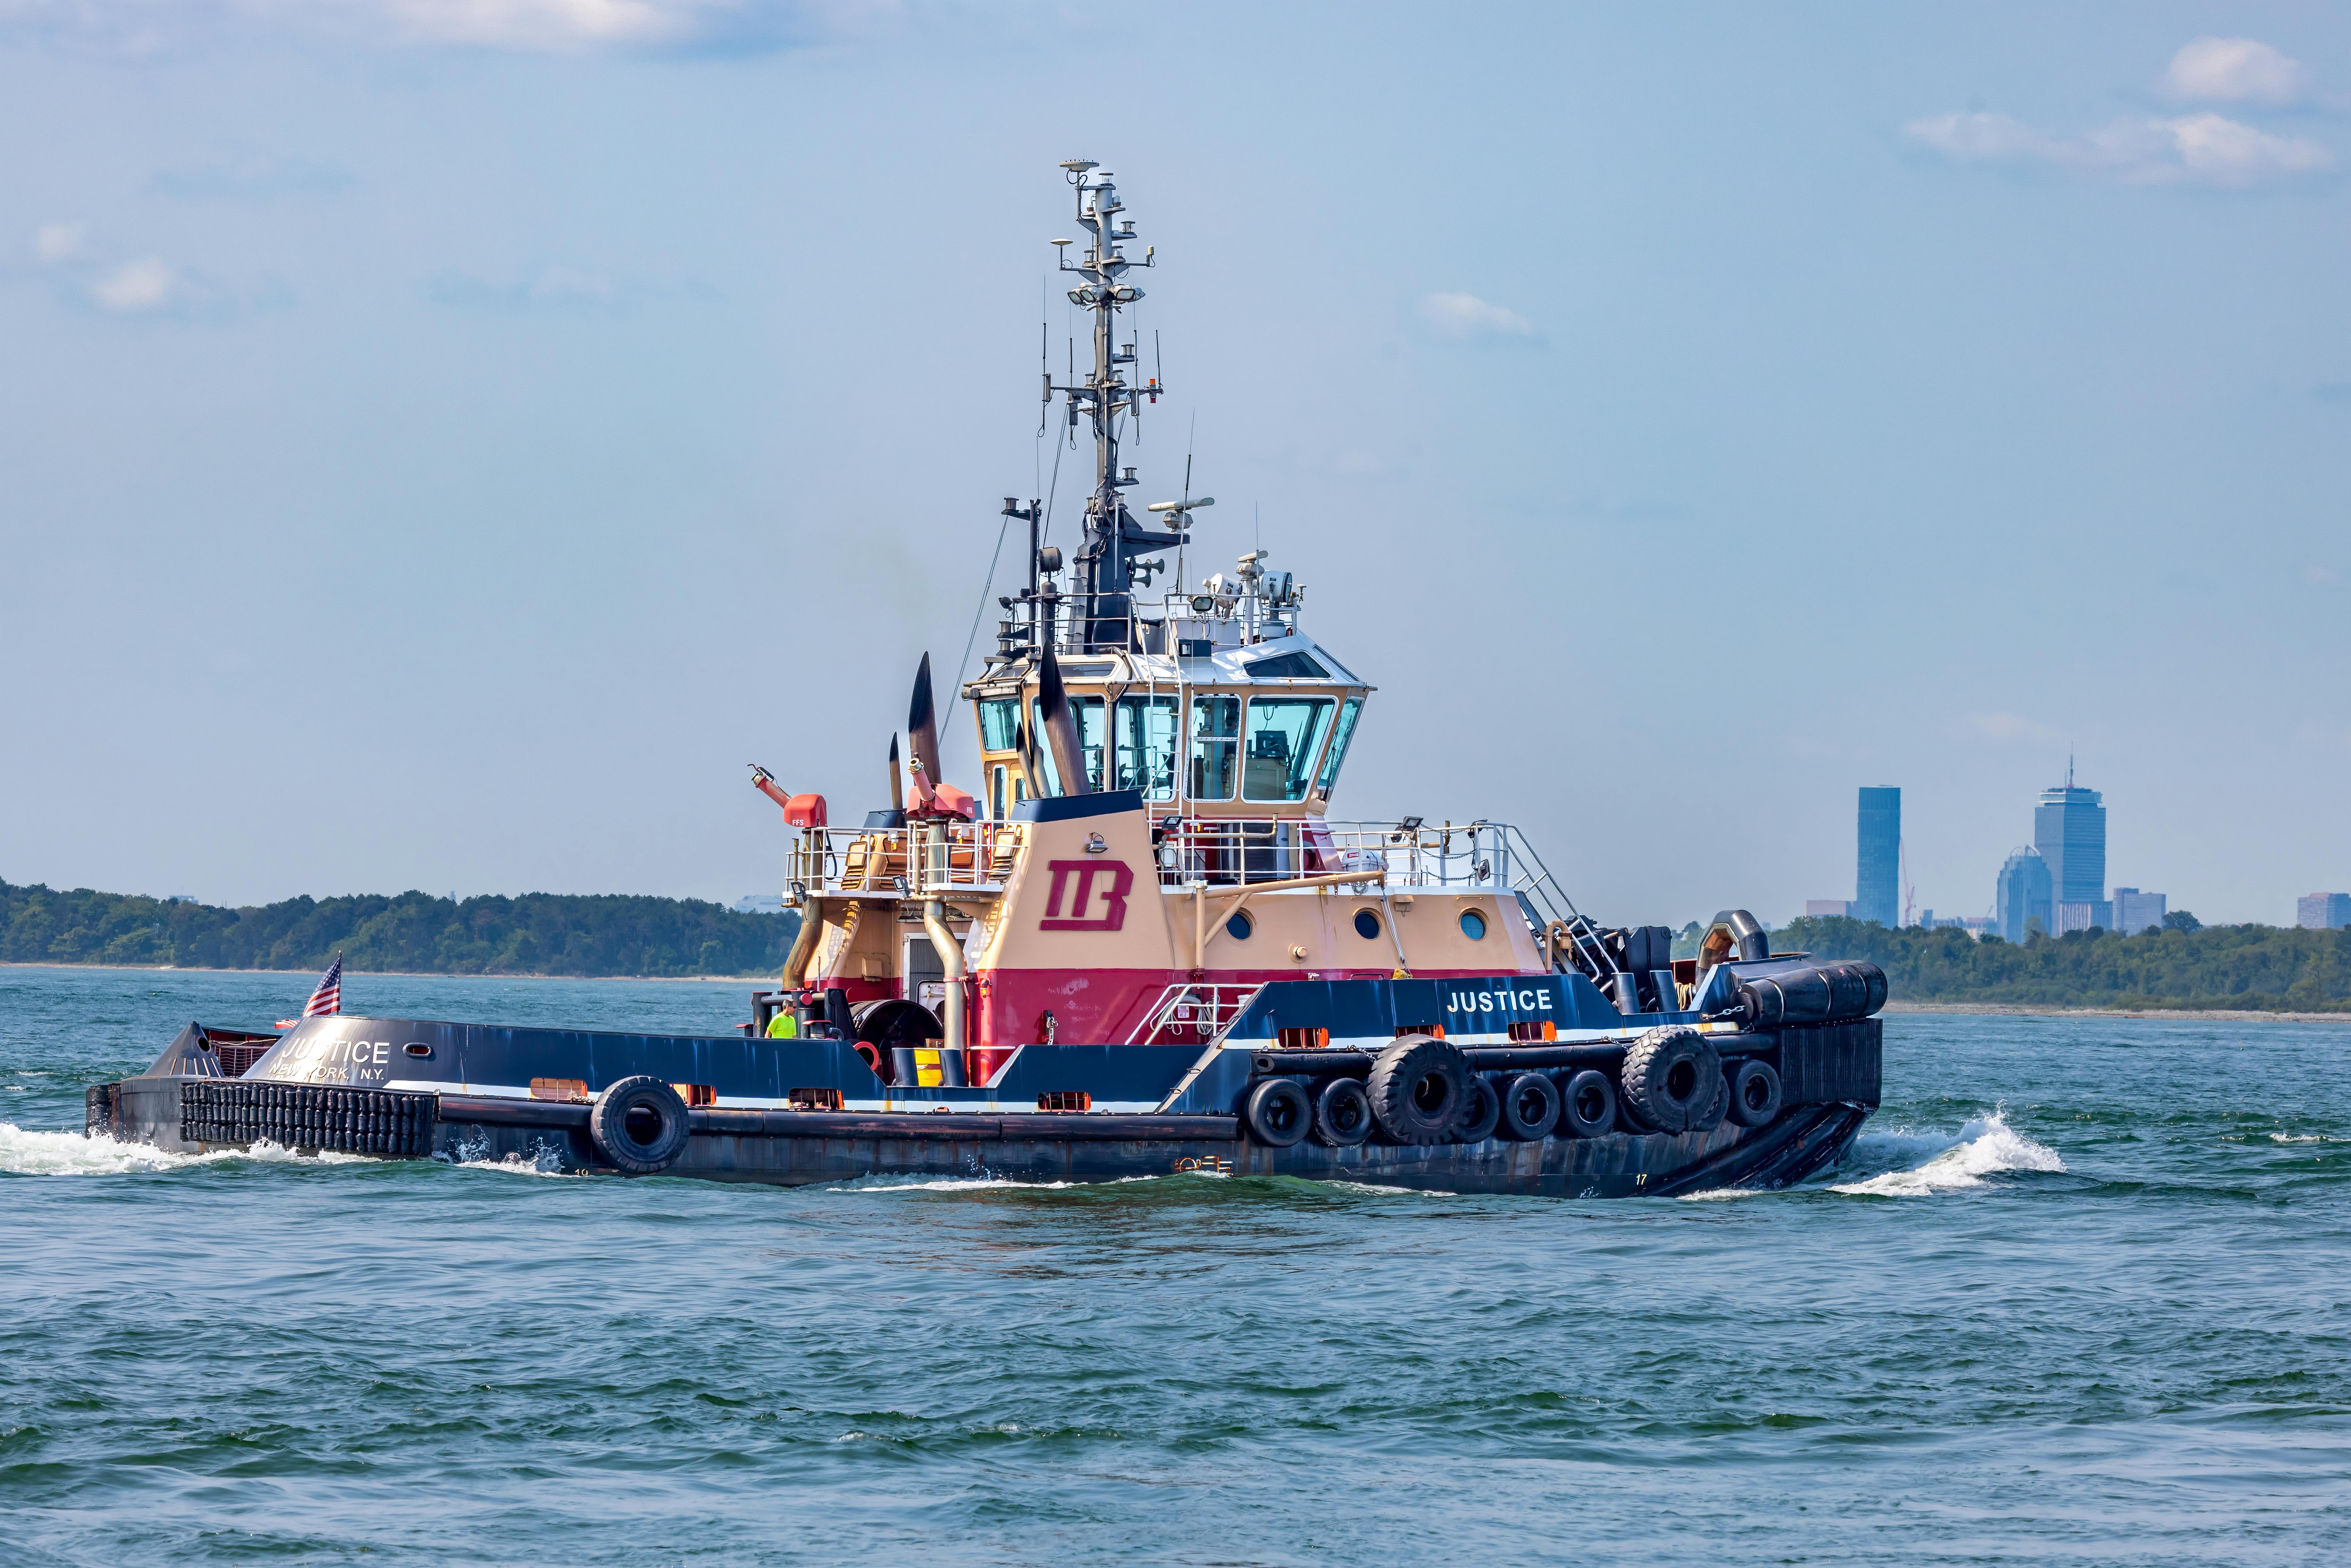 tugboat justice sailing on the bay